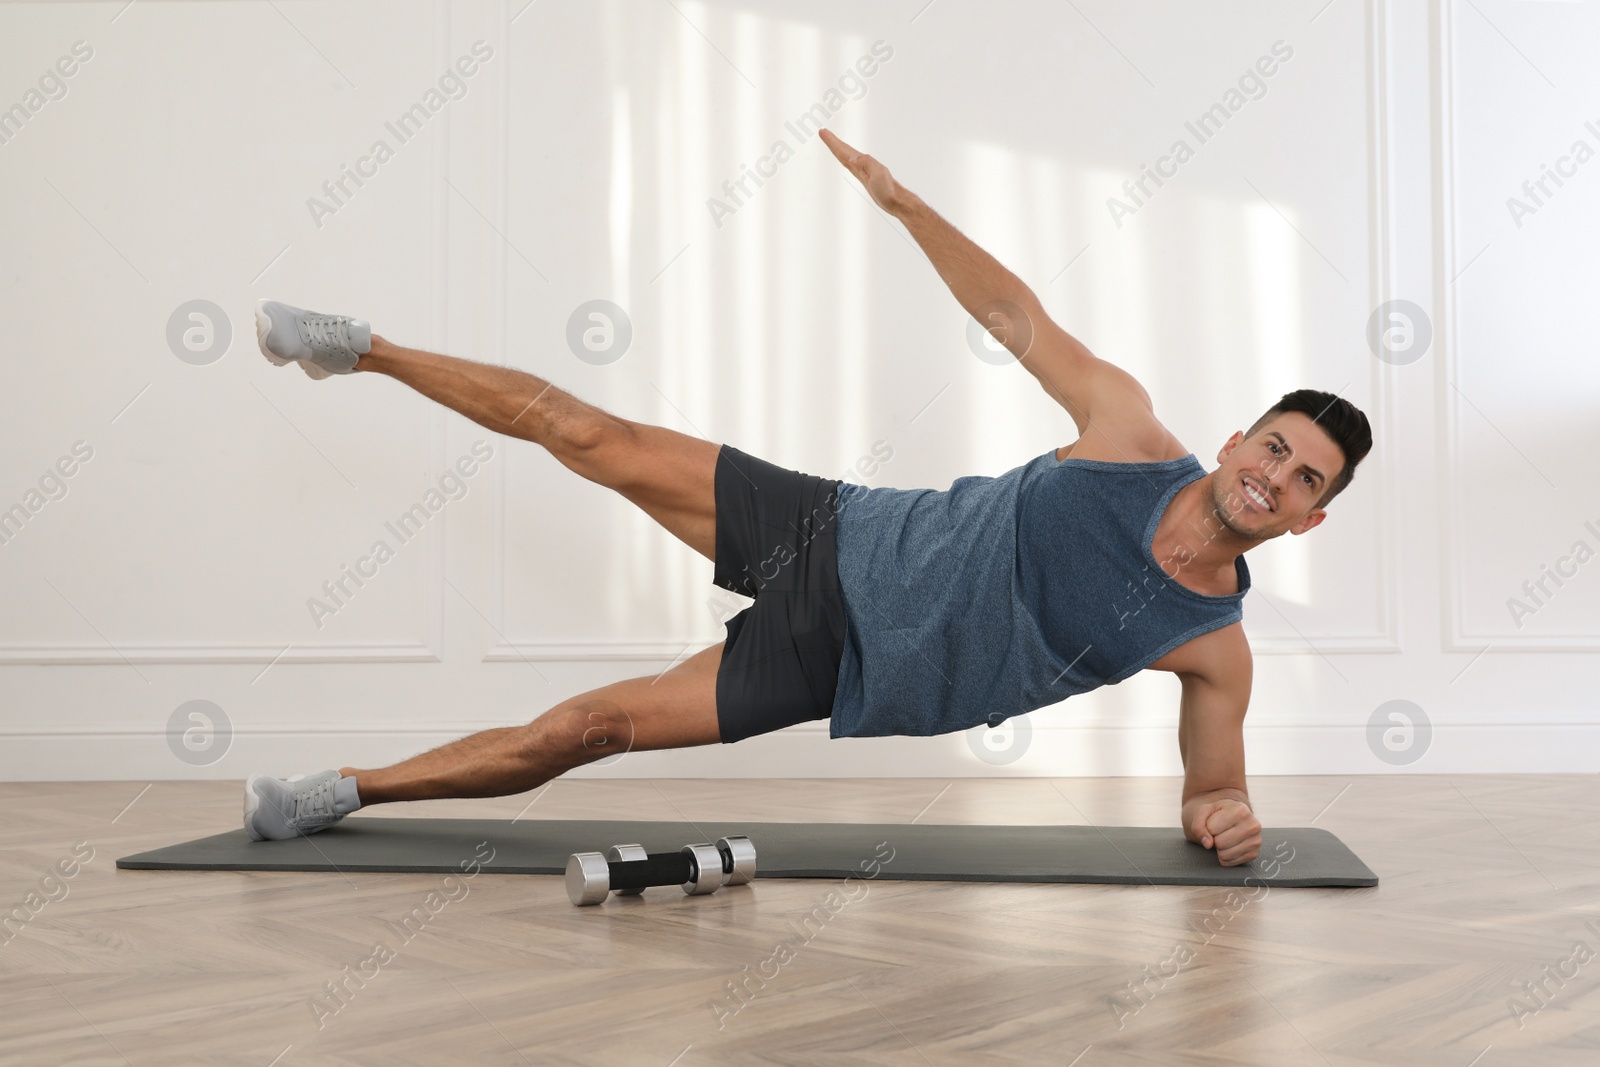 Photo of Handsome man doing exercise on yoga mat indoors